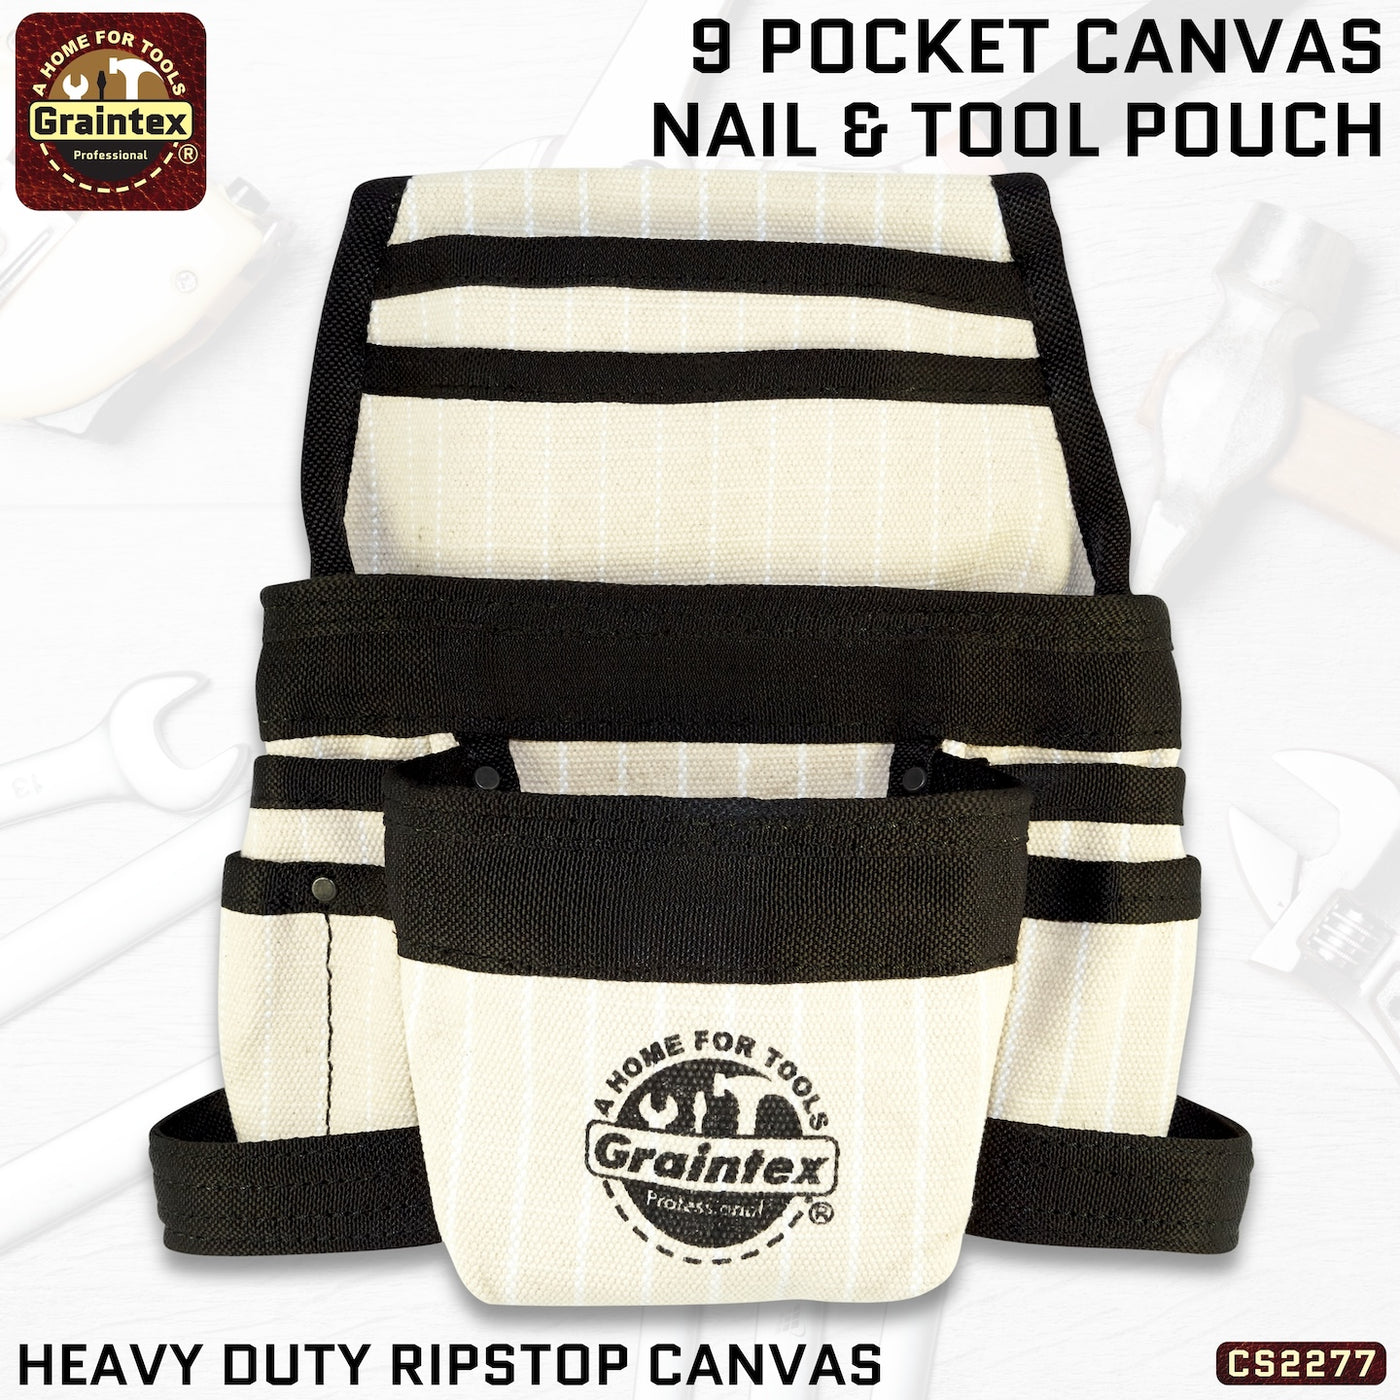 CS2277 :: 9 Pocket Nail & Tool Pouch Ripstop Canvas